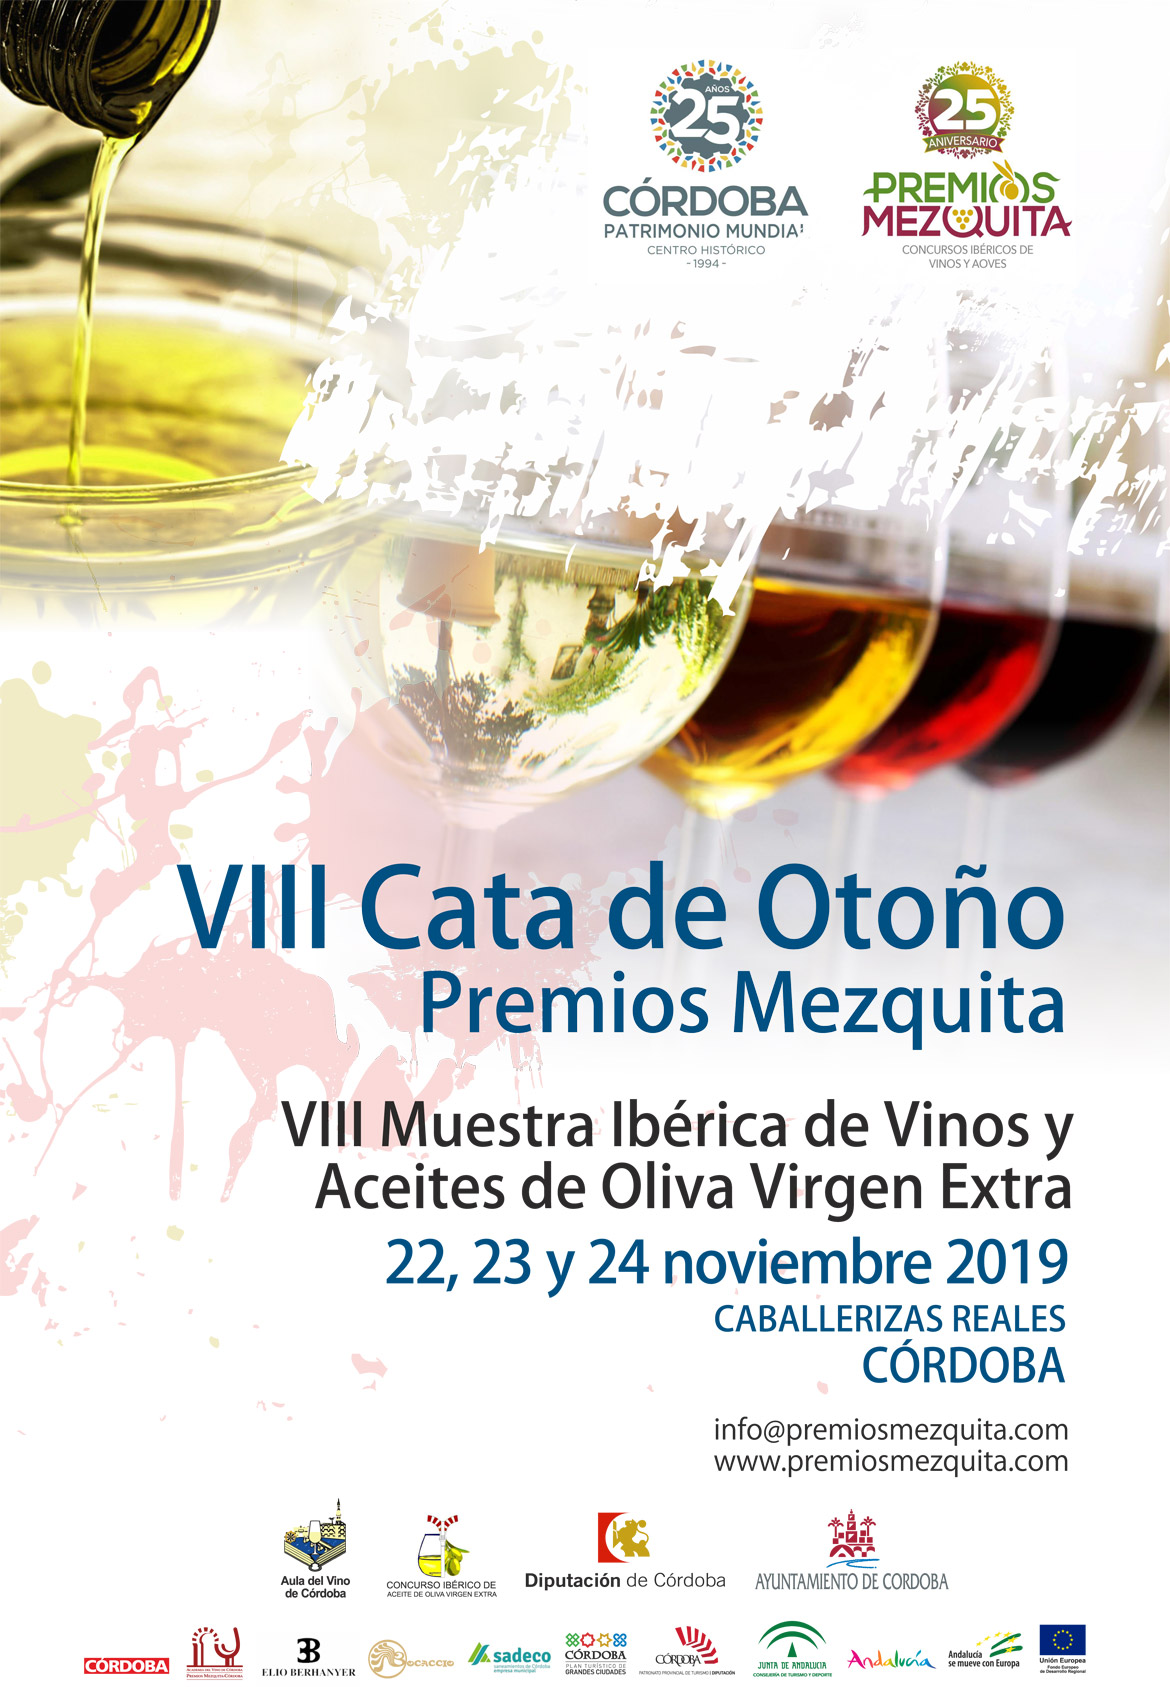 Iberian Exhibition of Wines and Extra Virgin Olive Oils (EVOO), Autumn Tasting (Cordoba - Spain)